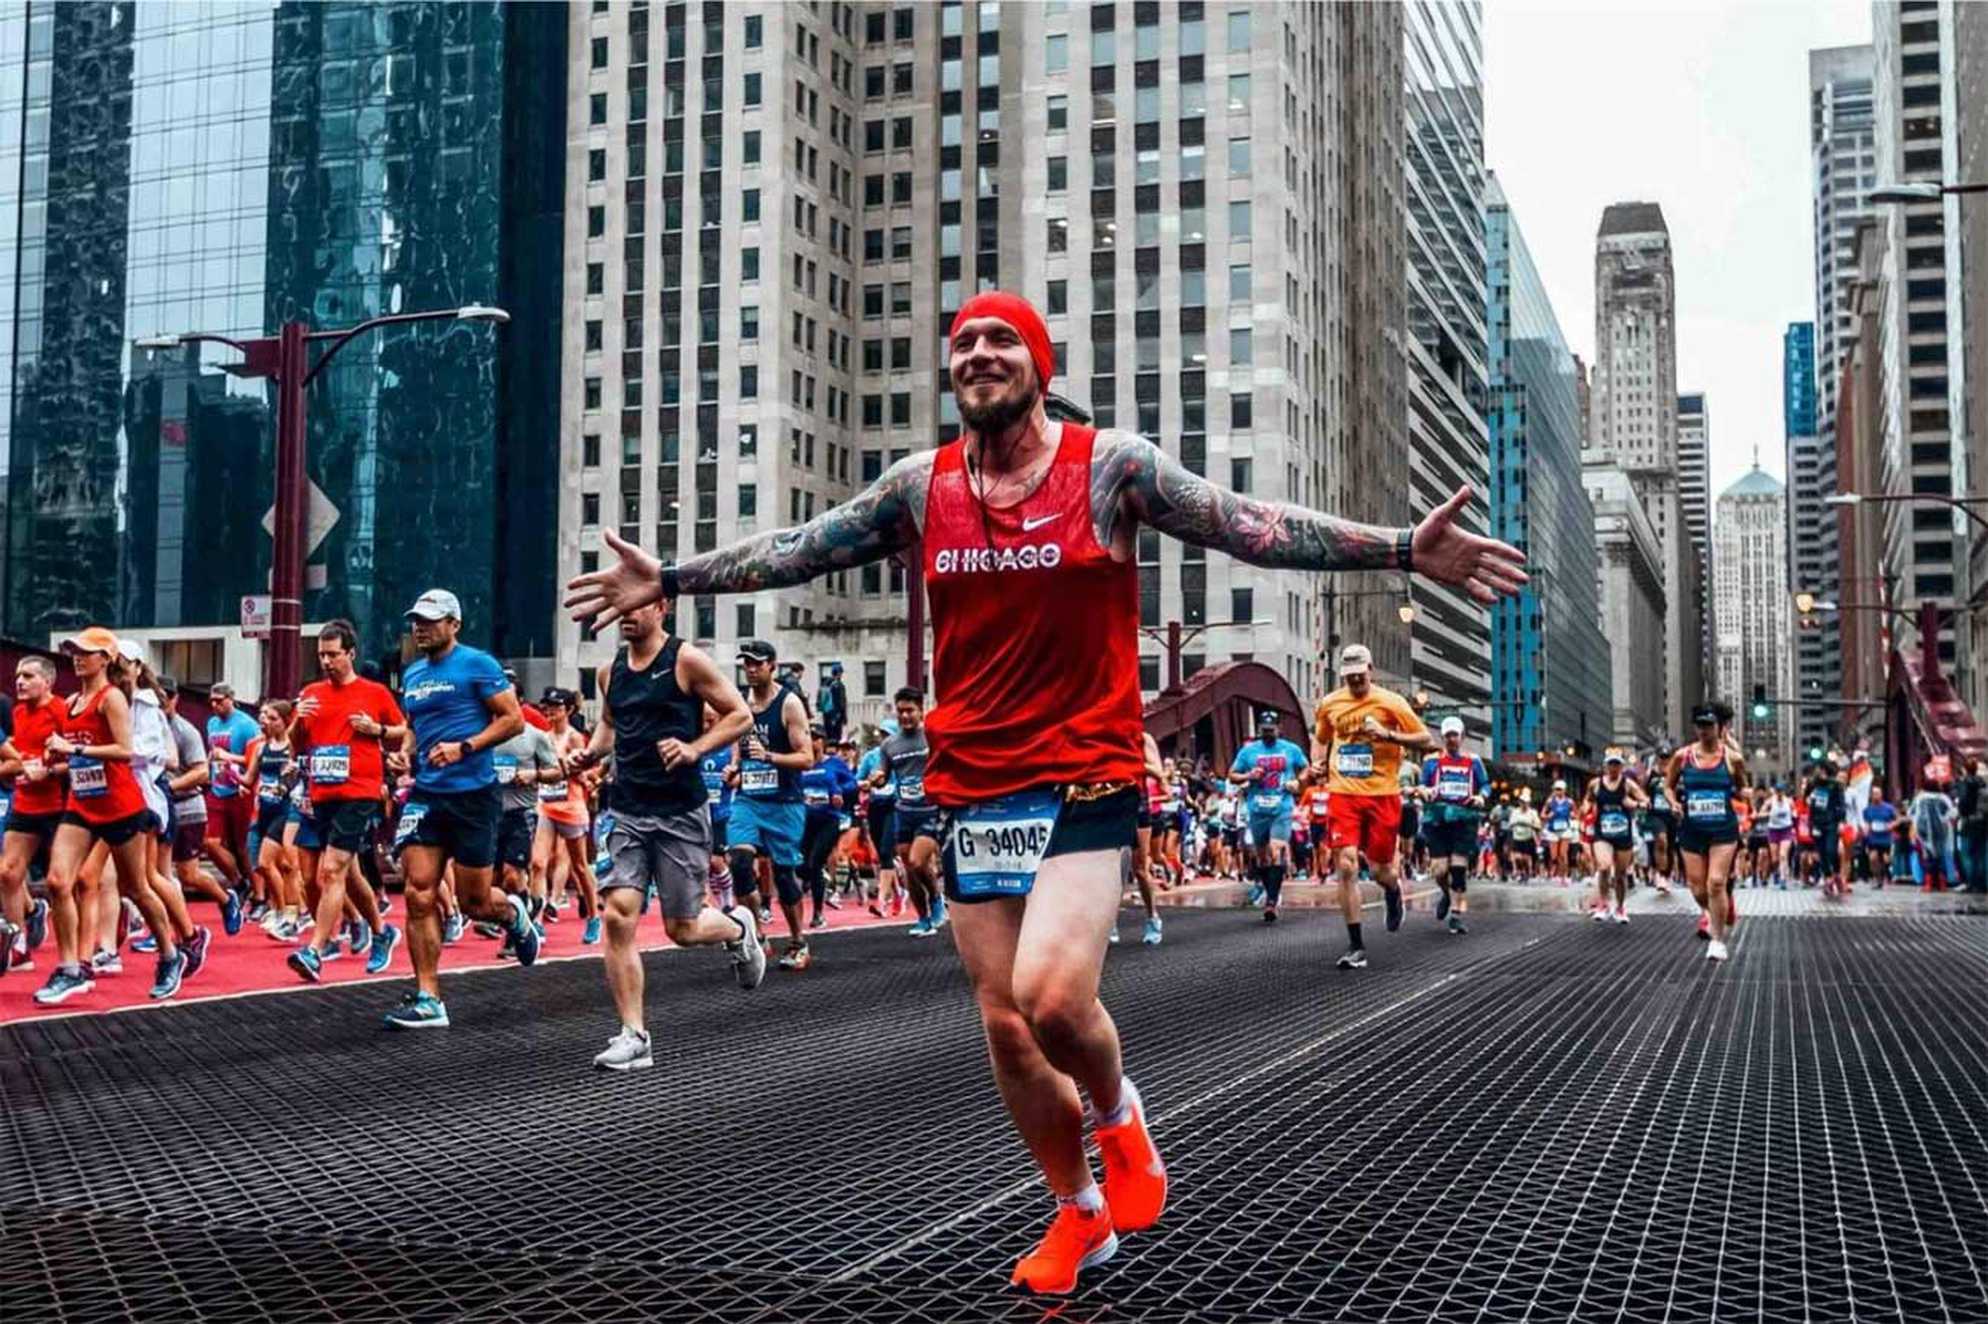 A runner with his arms in the air as he passes through the city streets during the Chicago Marathon.